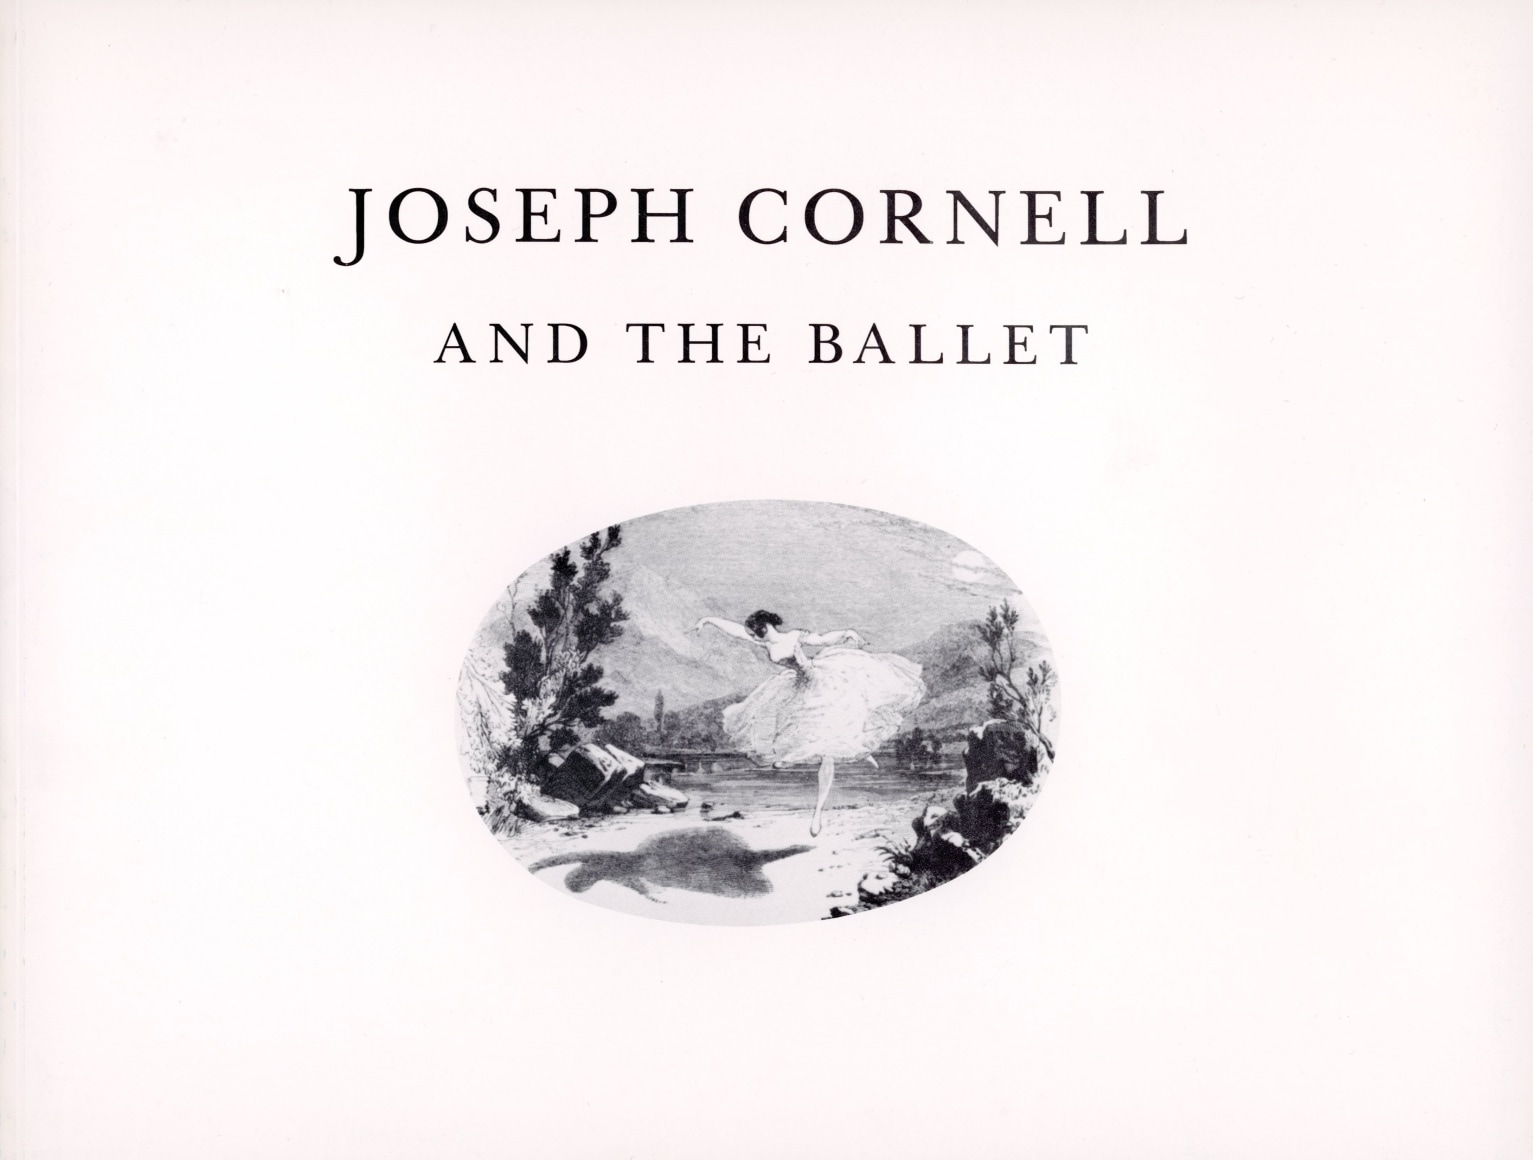 Cover of Joseph Cornell and the Ballet catalogue published by Leo Castelli Gallery in 1983